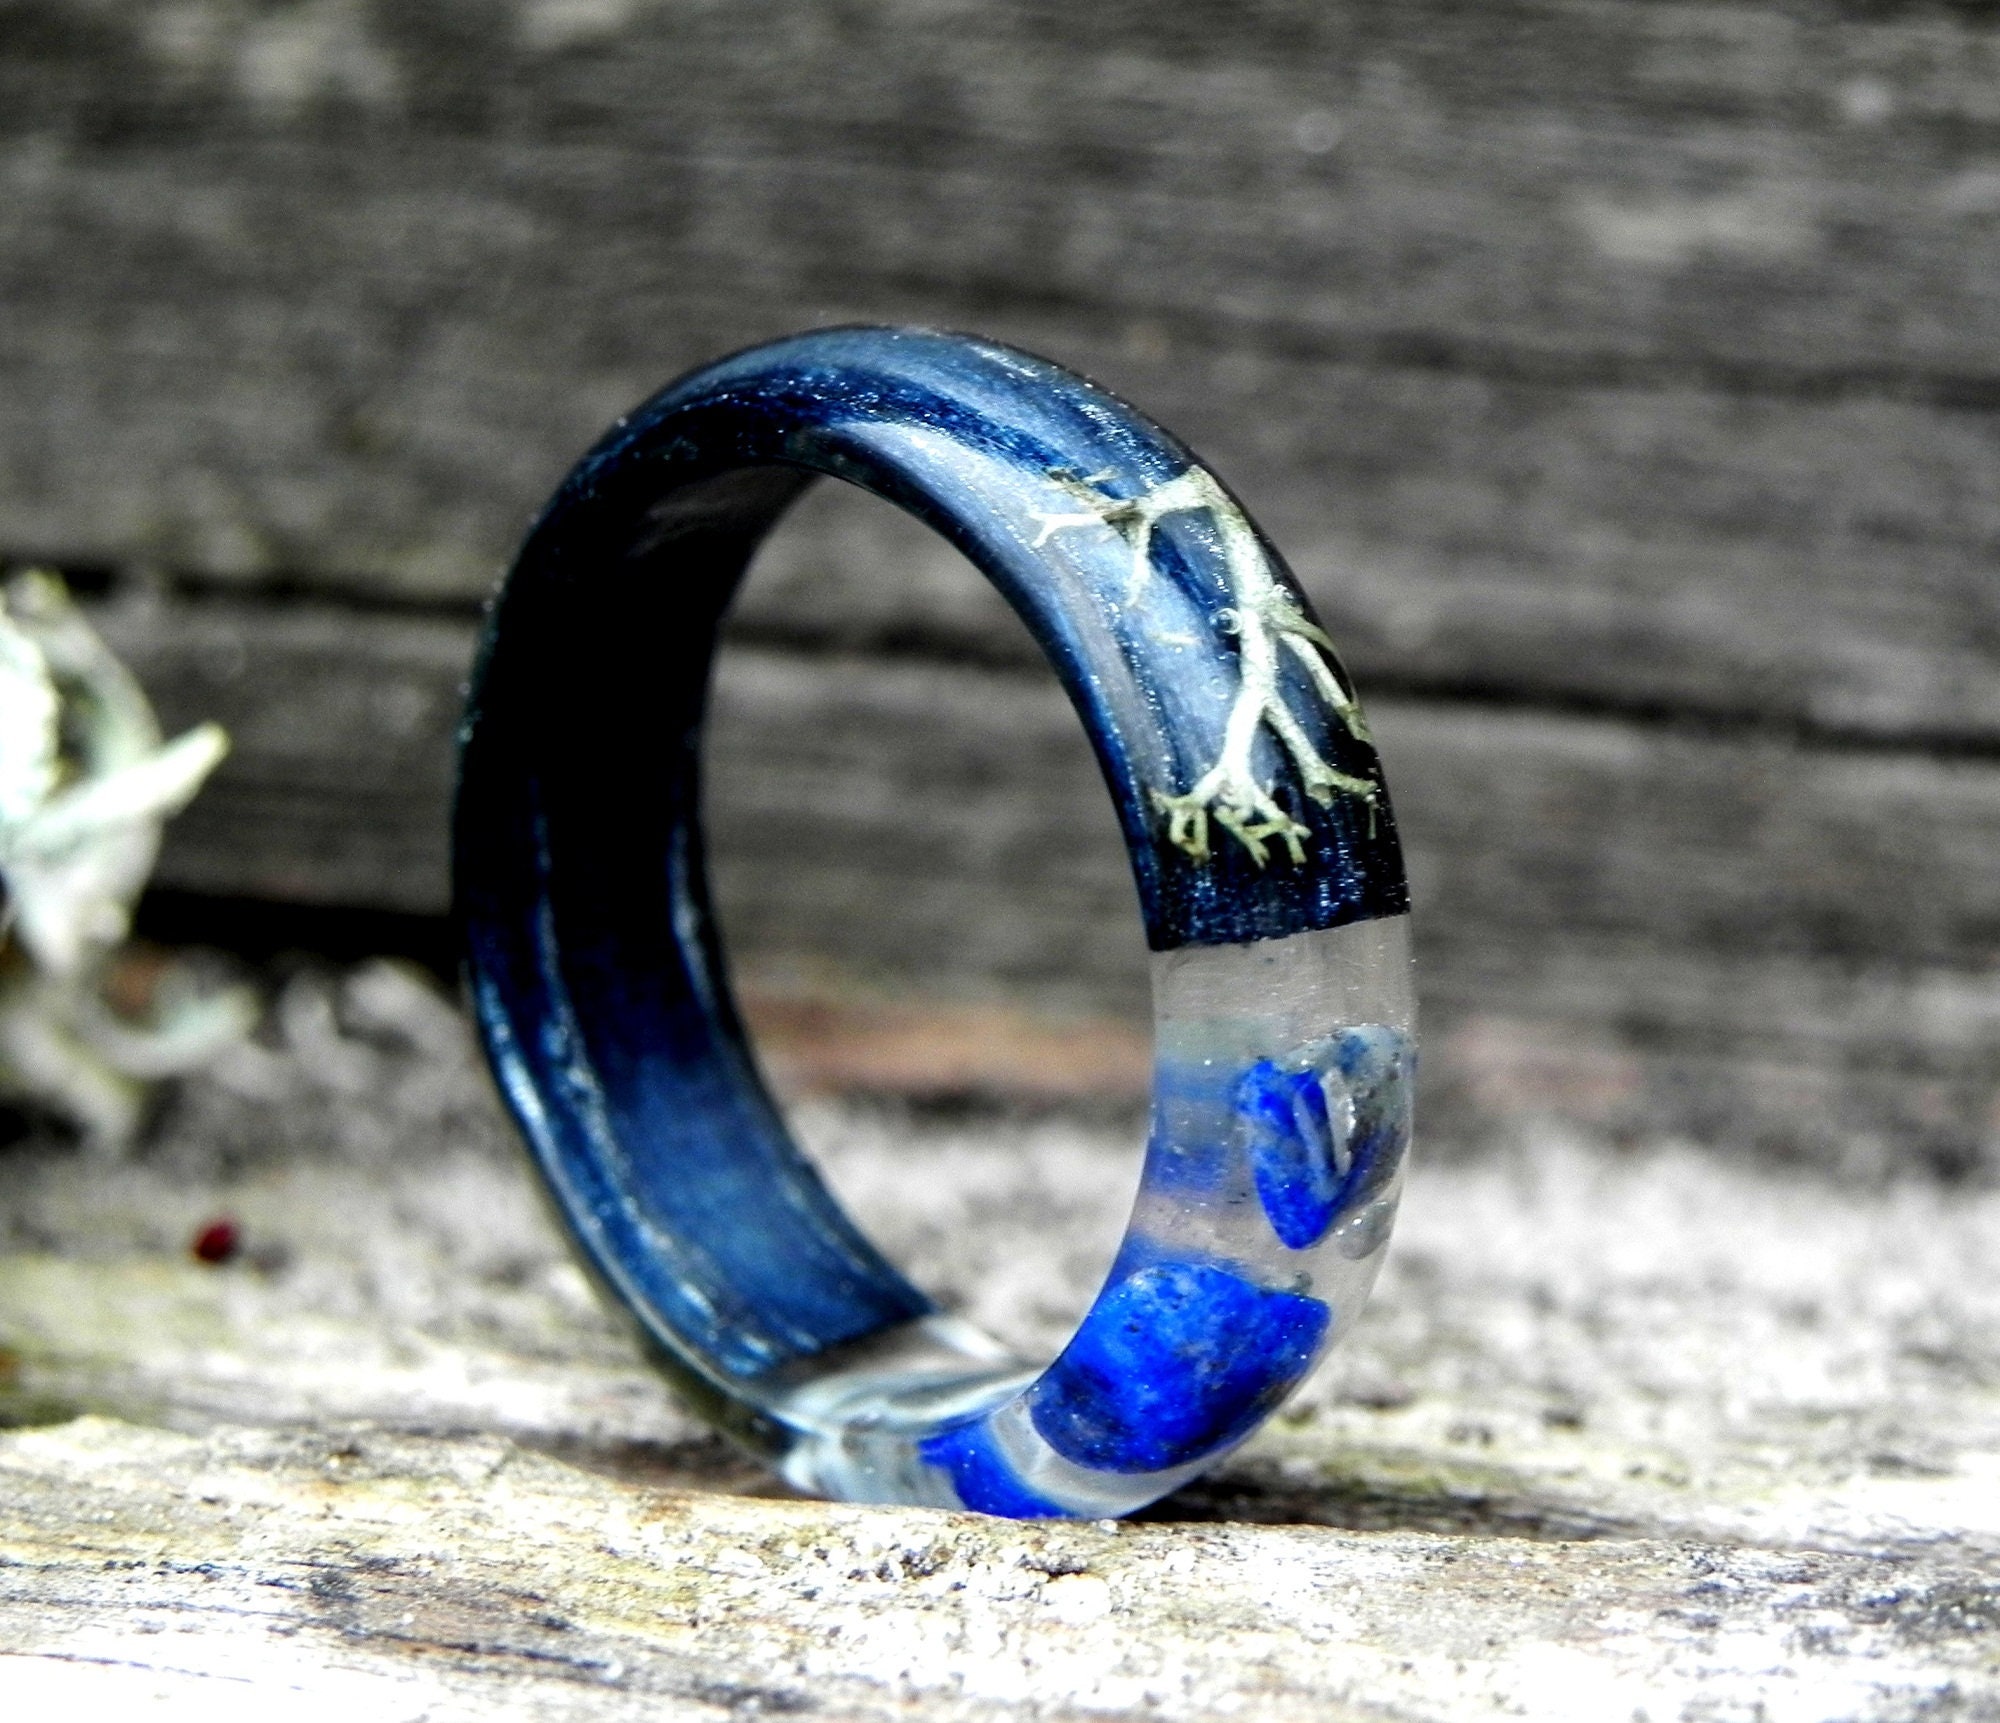 Bentwood Kingwood Wood Wedding Rings, Blue Lapis, Silver Blue Glass -  Bentwood Jewelry Designs - Custom Handcrafted Bentwood Wood Rings